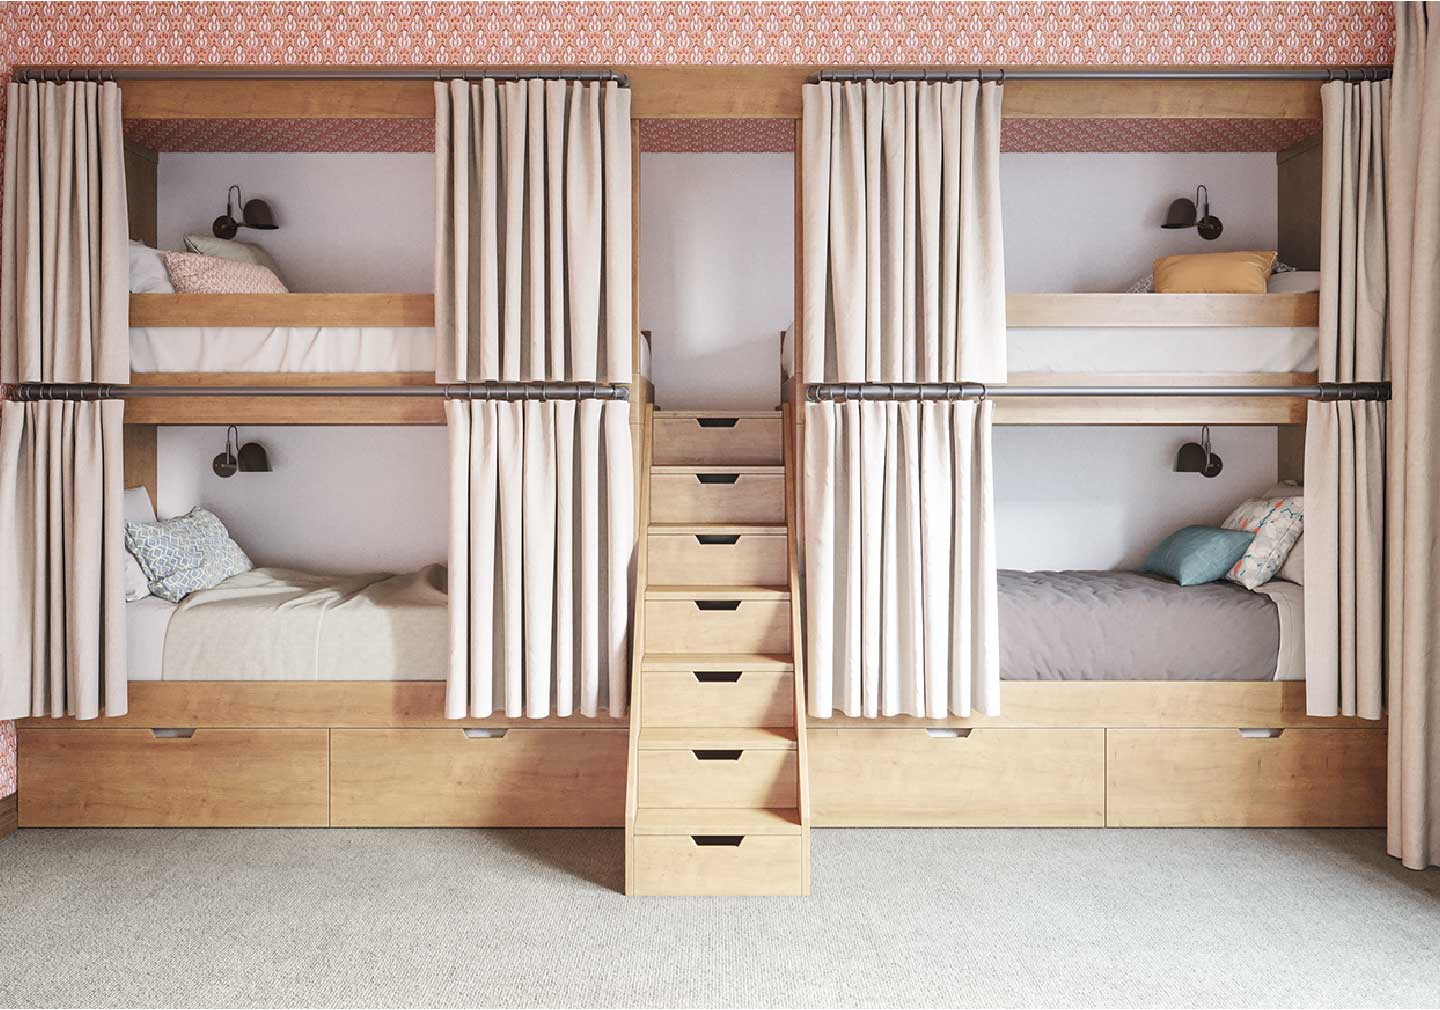 Bunk Beds: Space-Efficient and Socially Engaging 